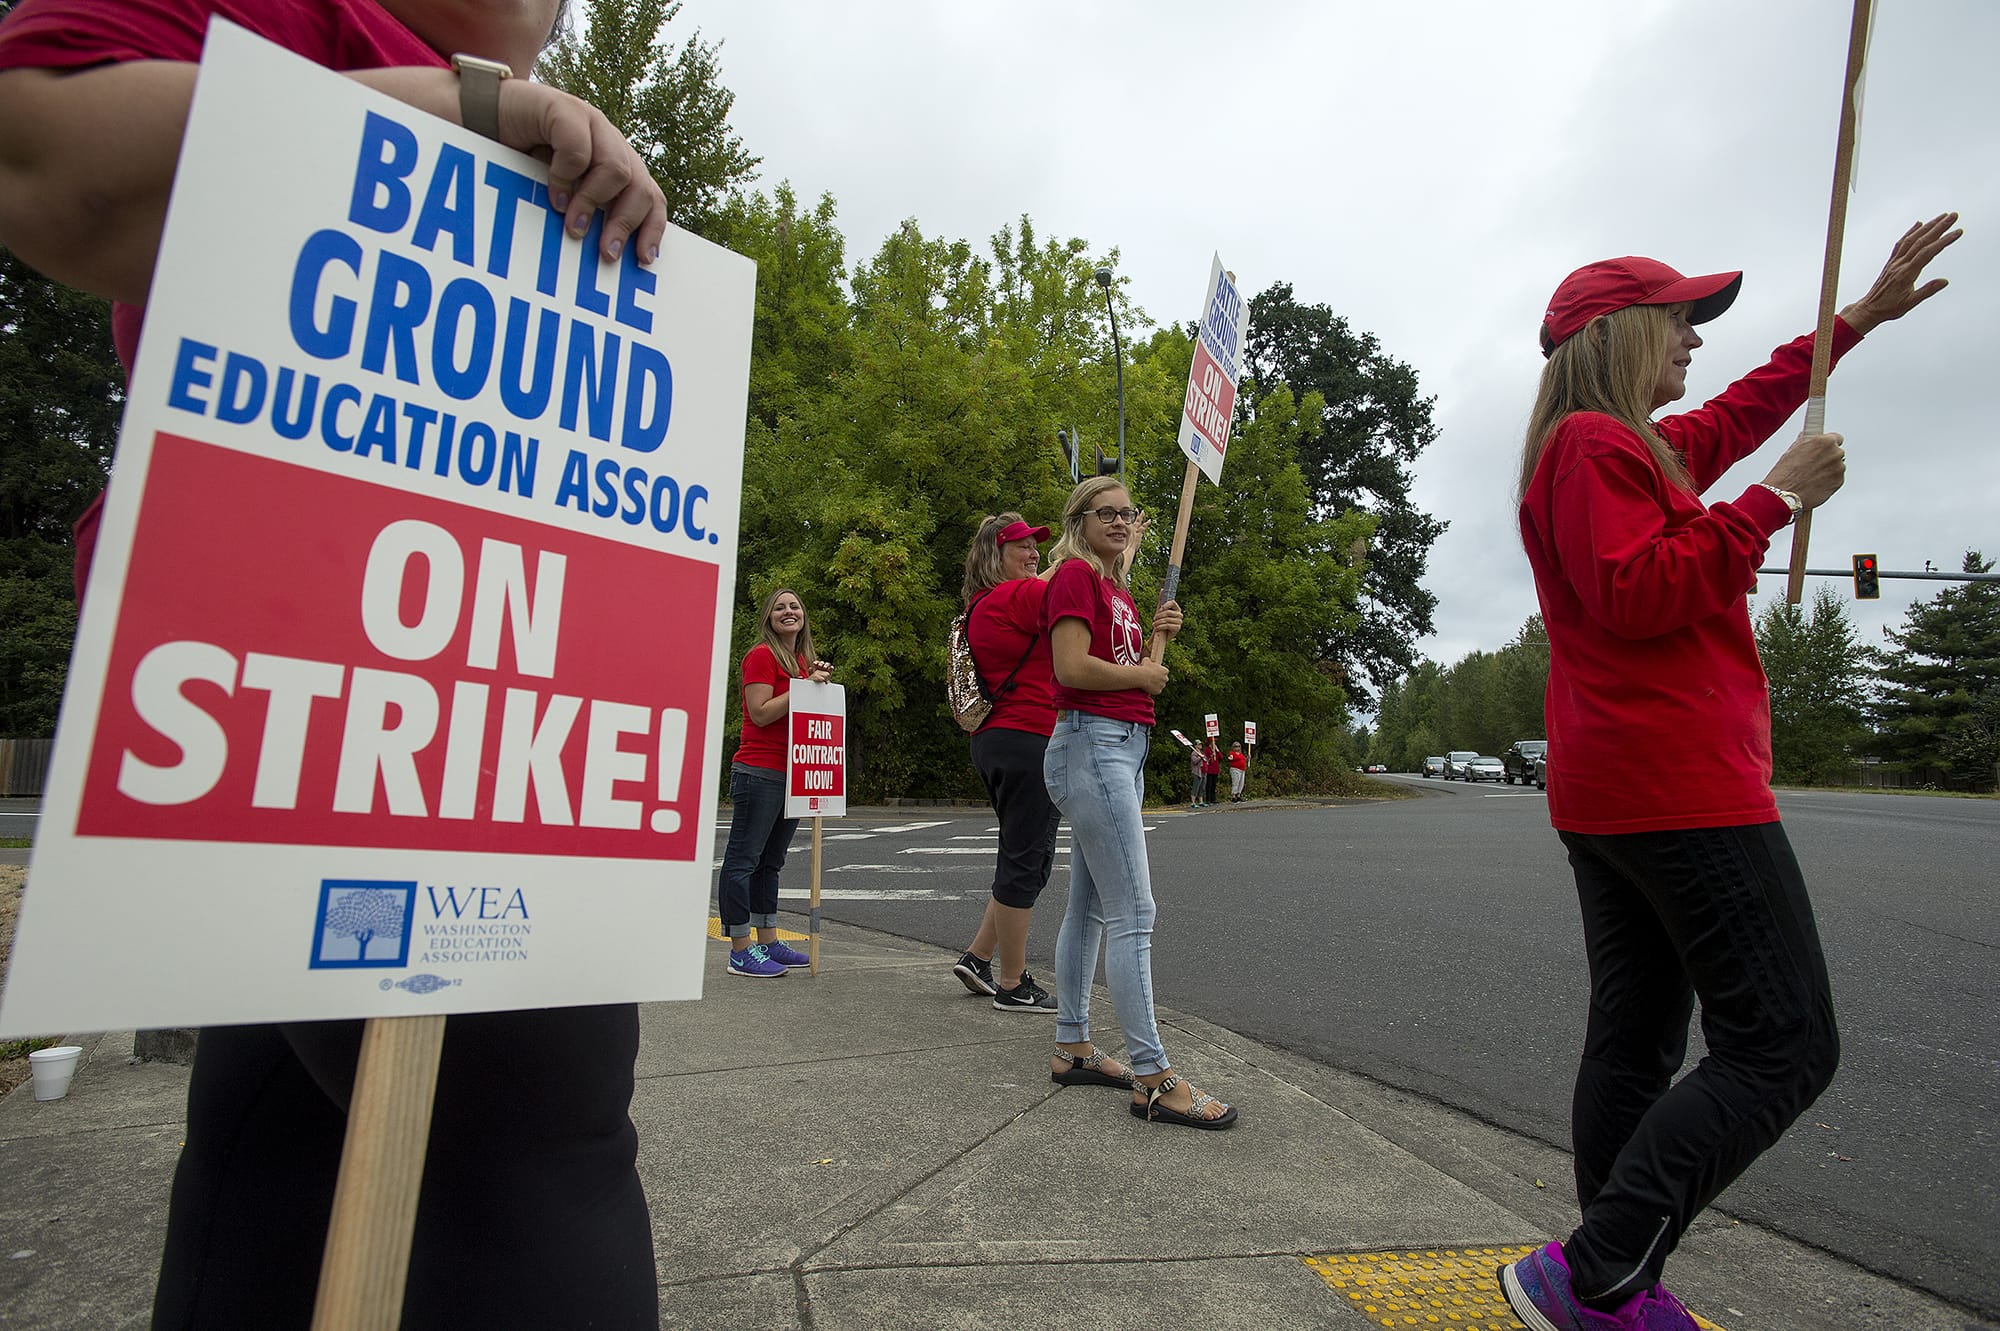 Teachers and supporters greet motorists along Northwest 10th Avenue while sign waving during the strike in Battle Ground on Thursday morning, Aug. 30, 2018.